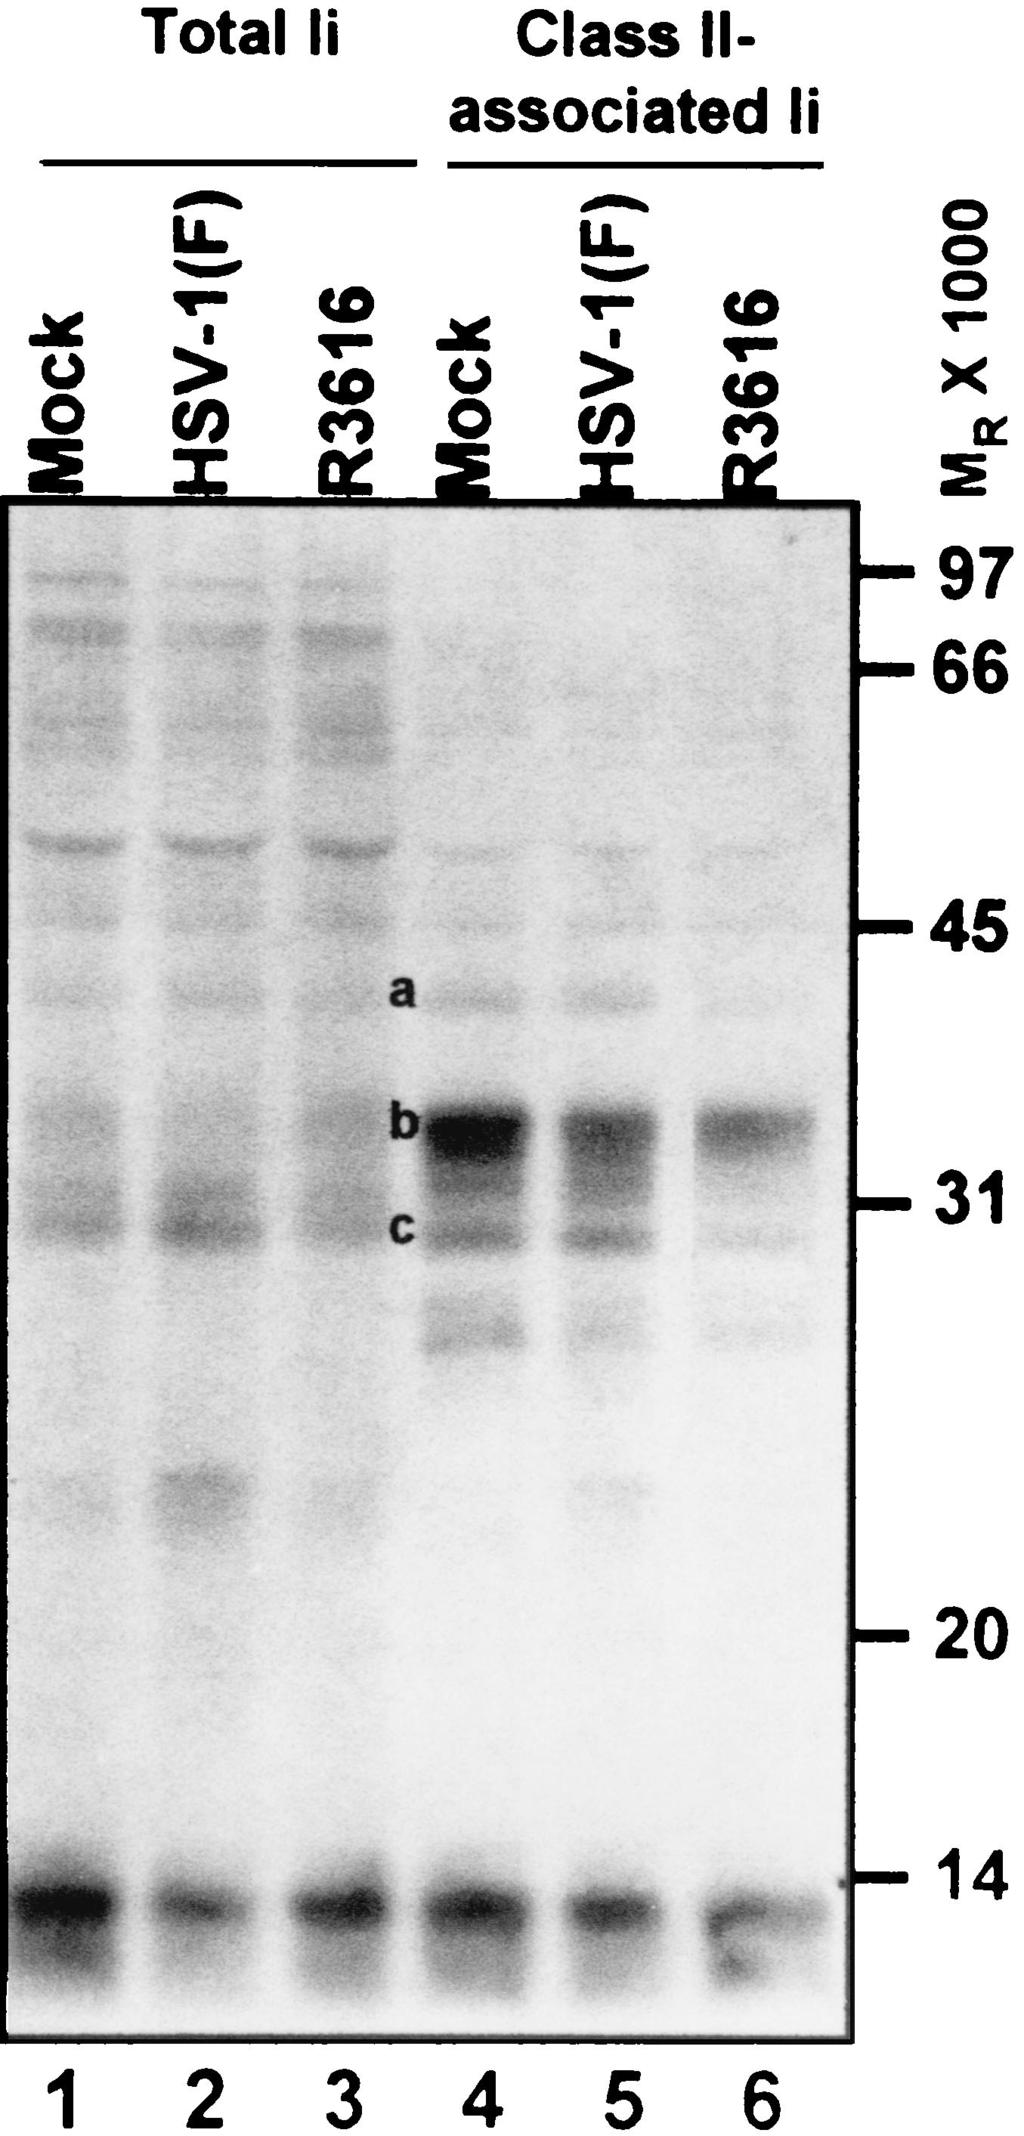 Replicate 25-cm 2 flask cultures of His16 (A) and His28 (B) cells were incubated in the presence of [ 35 S]methionine for 2 h immediately preceding infection to label cellular proteins.